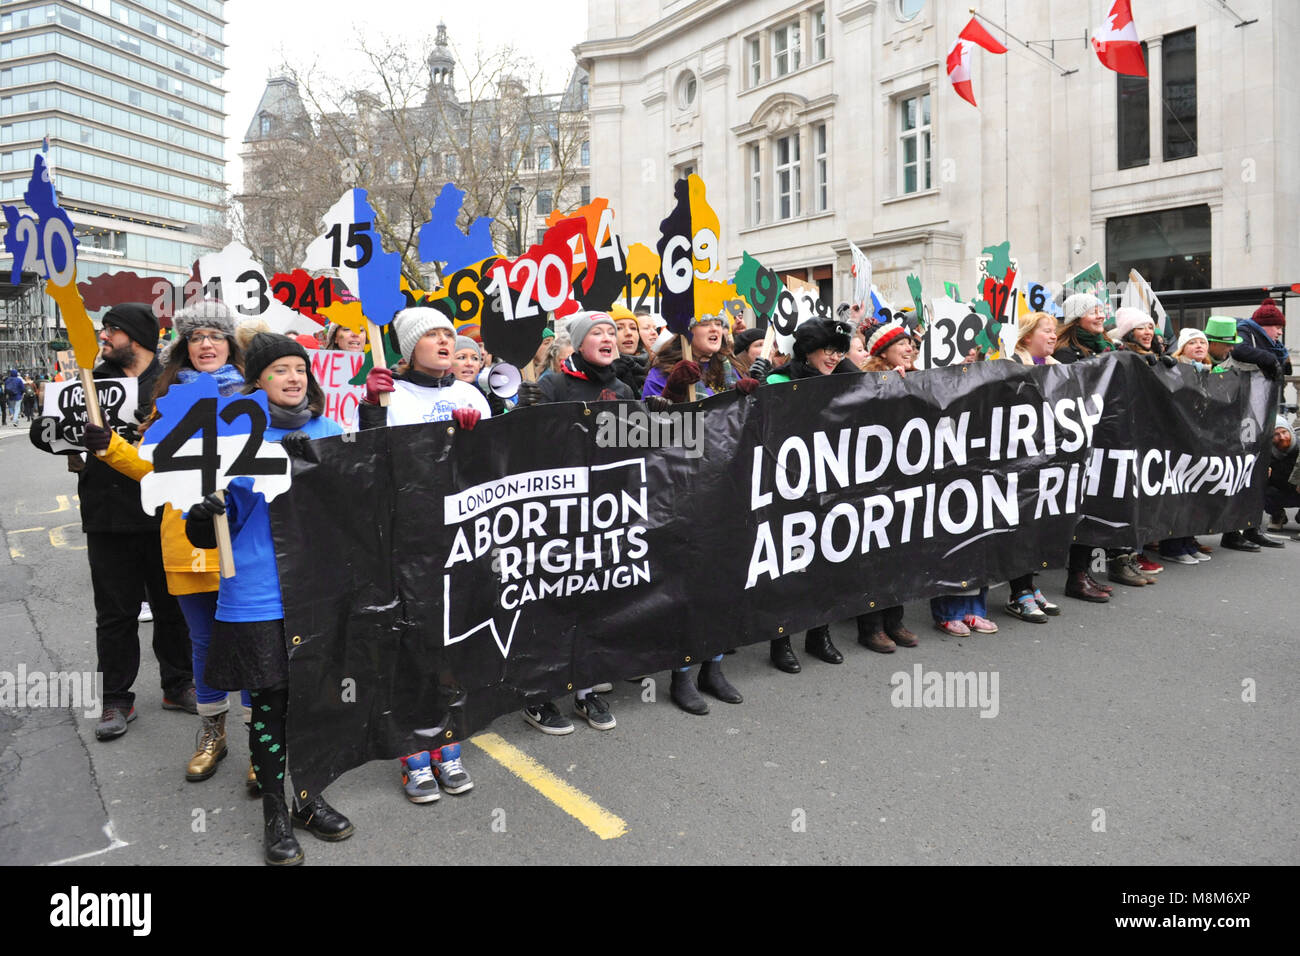 London, UK. 18th March, 2018. Campaigners from the London-Irish Abortion Rights Campaign marching in the annual St Patrick’s day parade in Central London, England, United Kingdom.  The campaign is aiming to repeal the Eighth Amendment from the Irish Constitution and to decriminalise abortion in Northern Ireland. Credit: Michael Preston/Alamy Live News Stock Photo